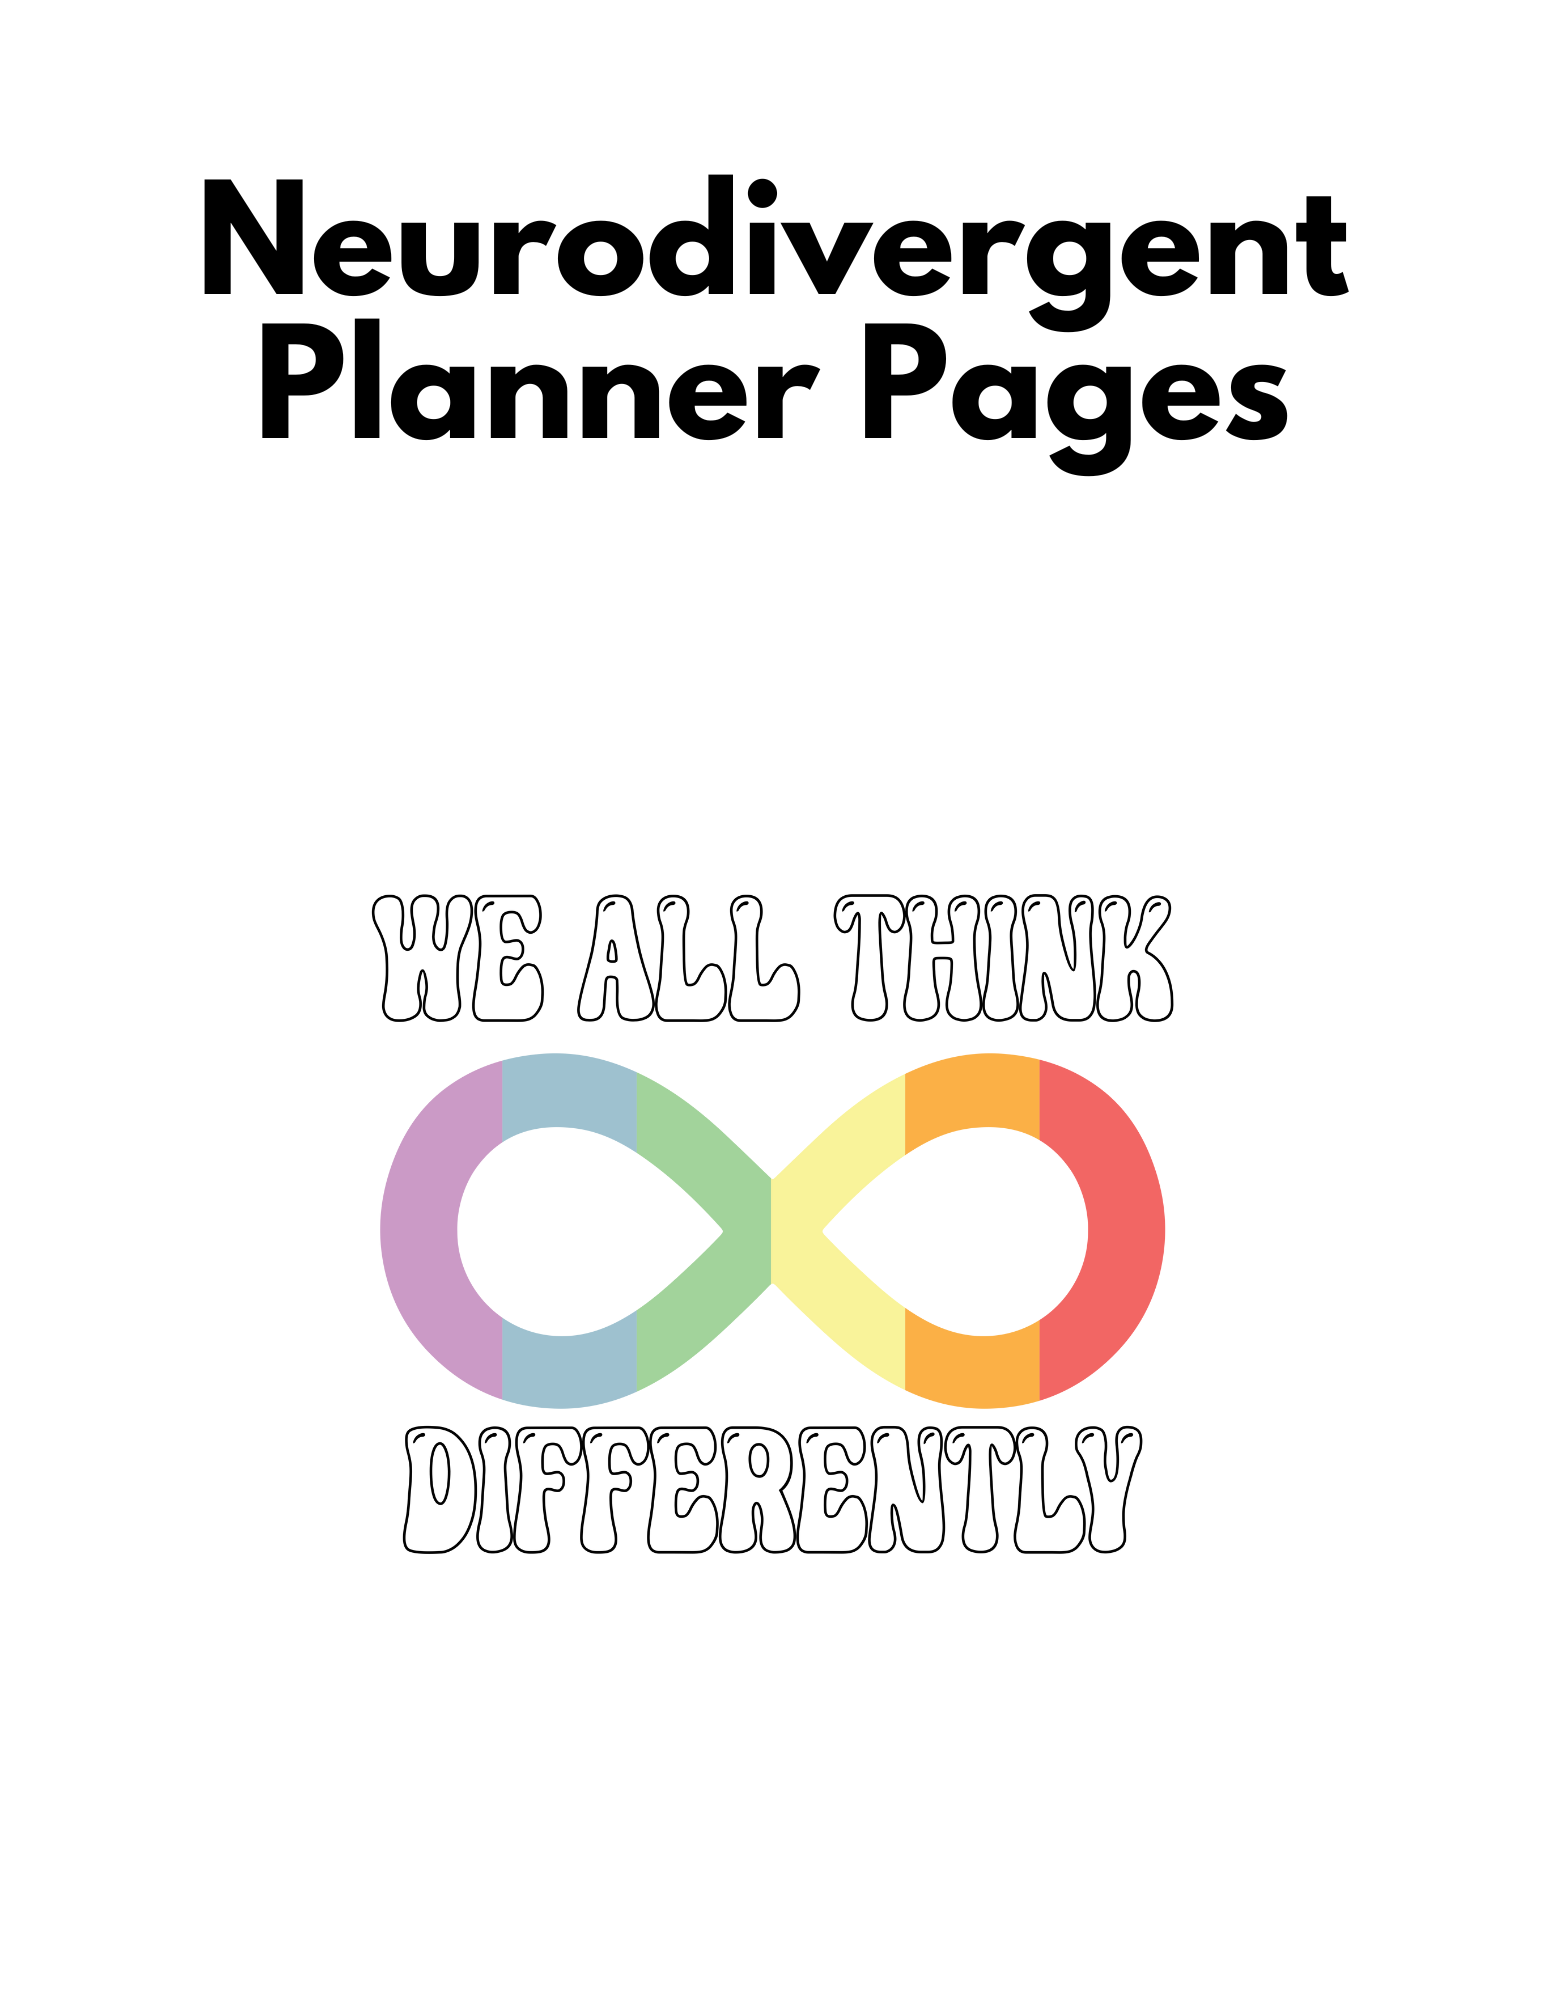 neurodivergent planner pages. image - we all think differently